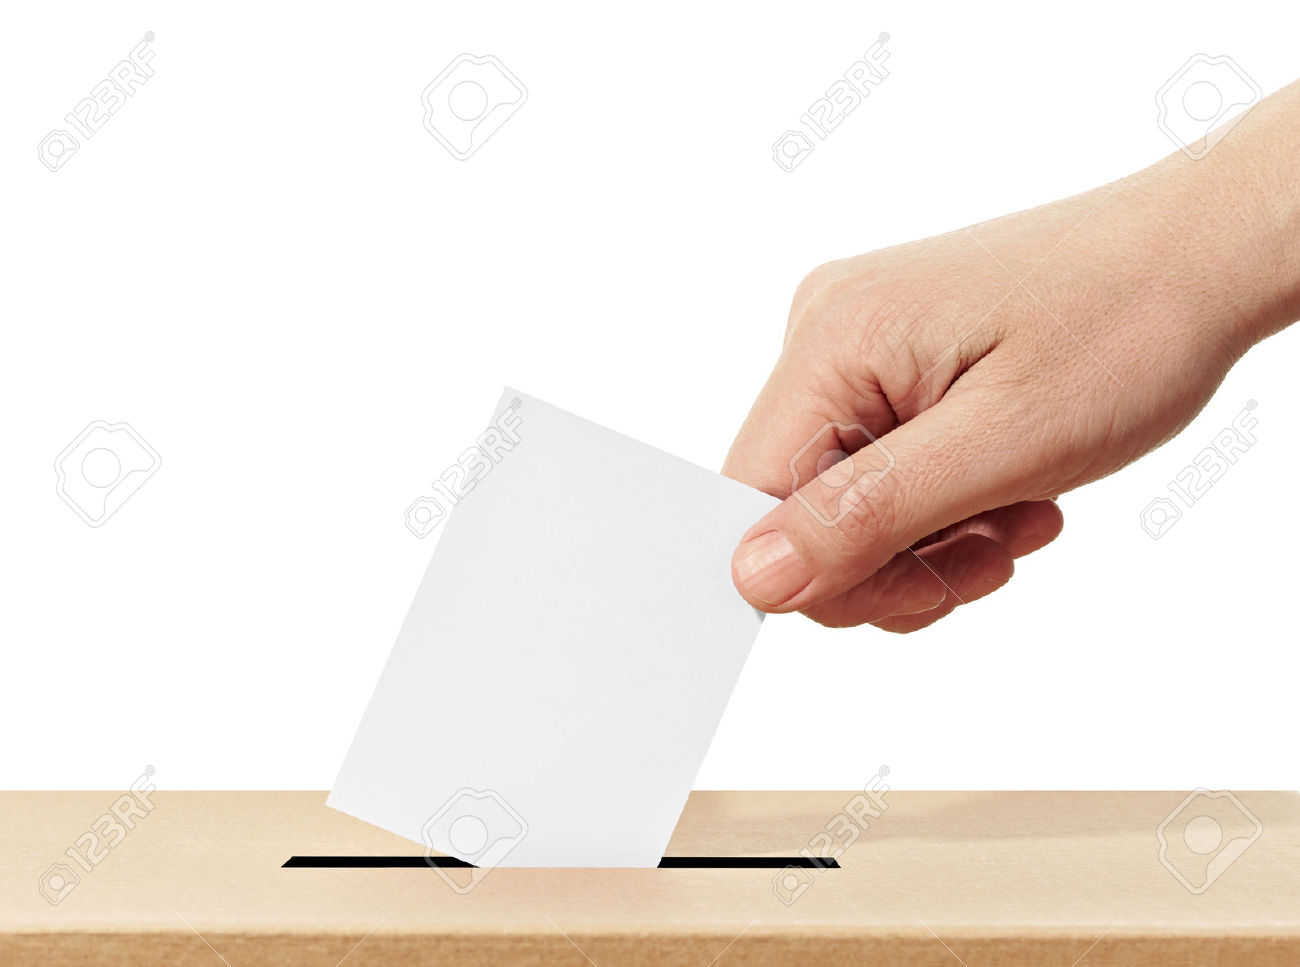 32805386-close-up-of-a-ballot-box-and-casting-vote-on-white-background-Stock-Photo